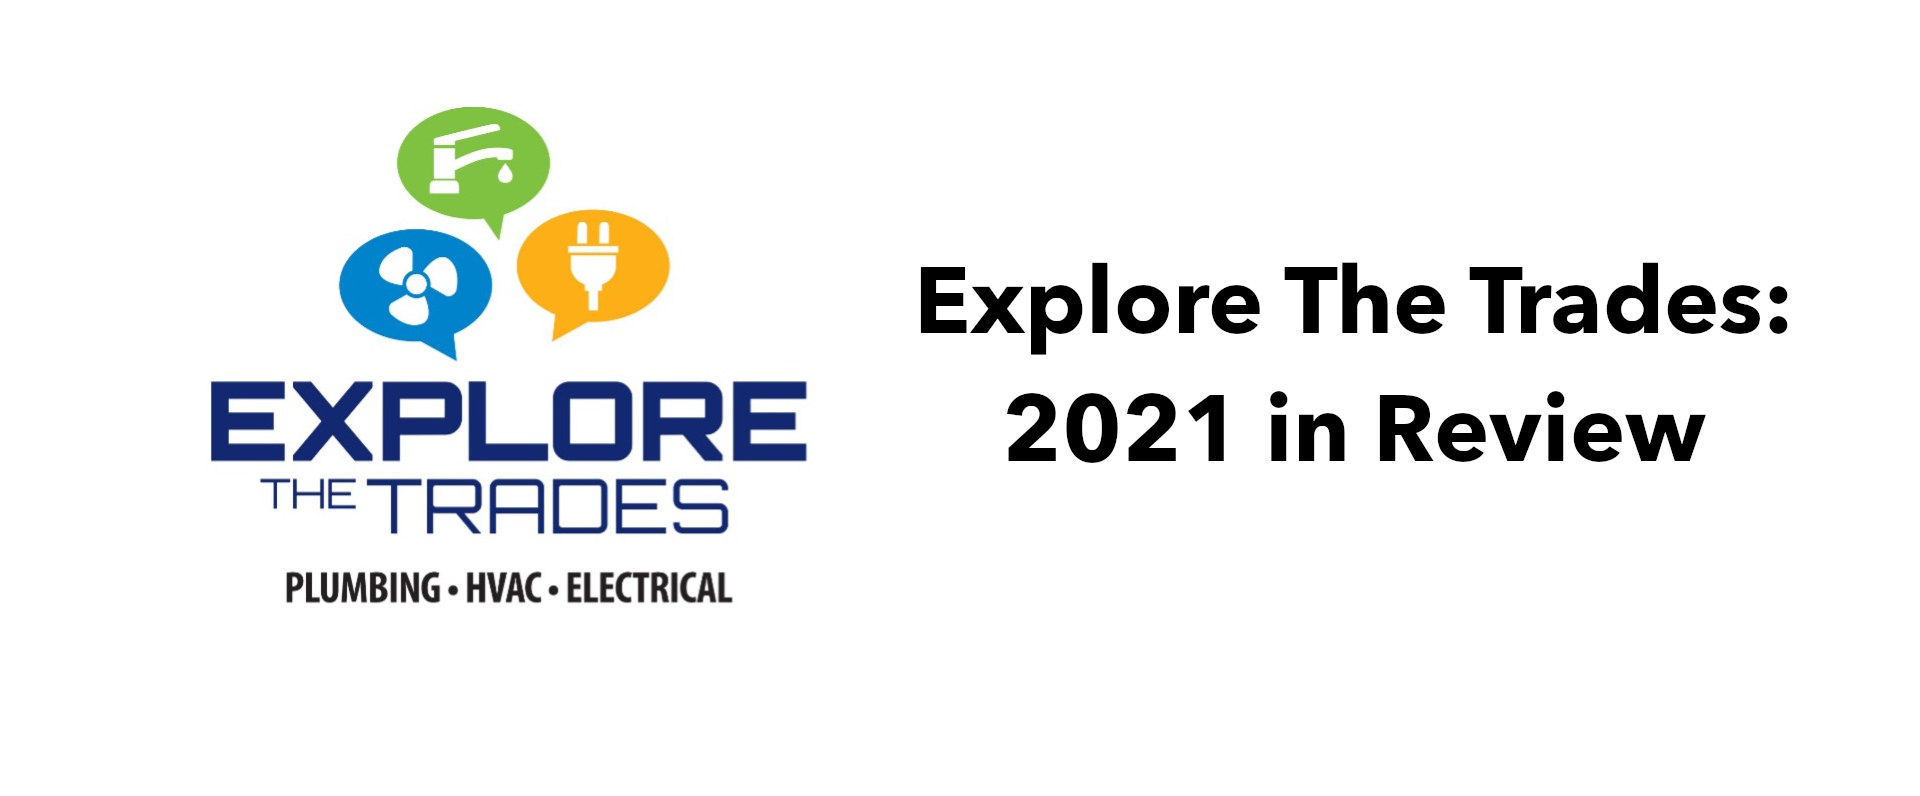 Explore The Trades: 2021 in Review